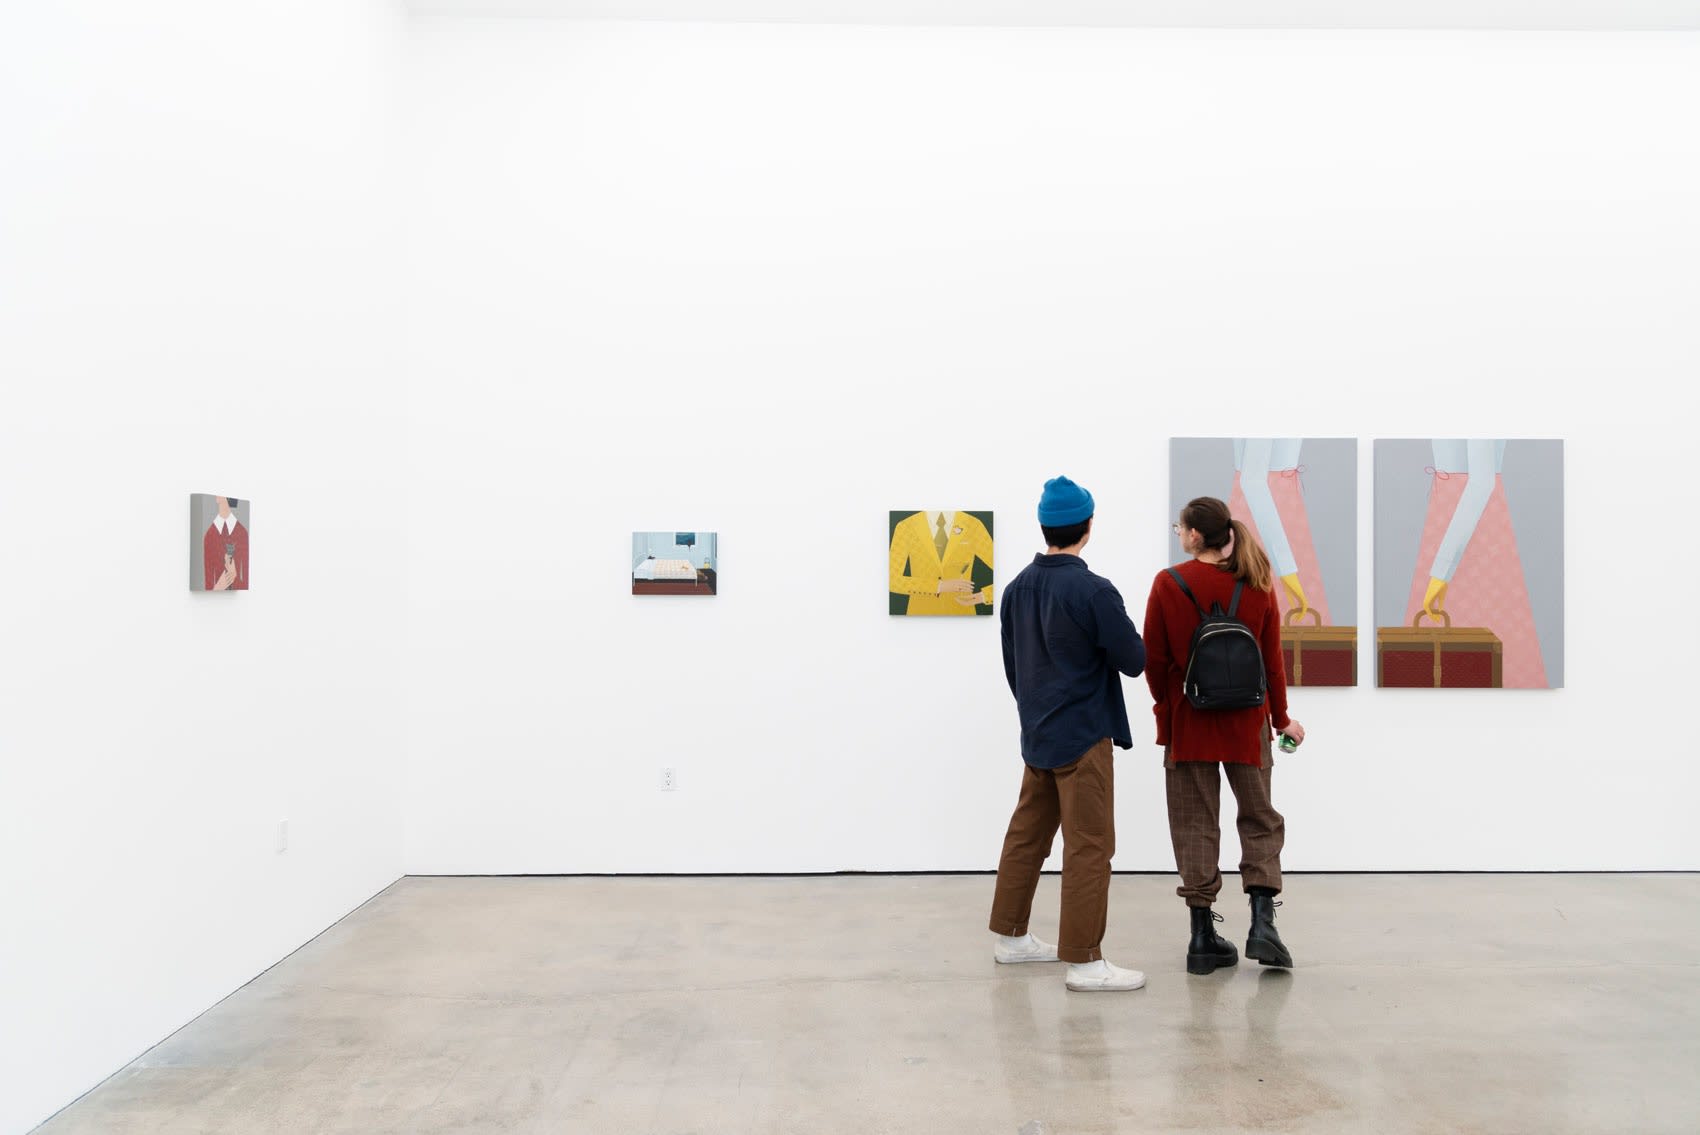 Two people look at Angela Burson's painting in an art gallery with white walls. Burson's paintings are bright, flat, and illustrative depictions of headless figures in motion, wearing classic patterns like polka dot or houndstooth. 